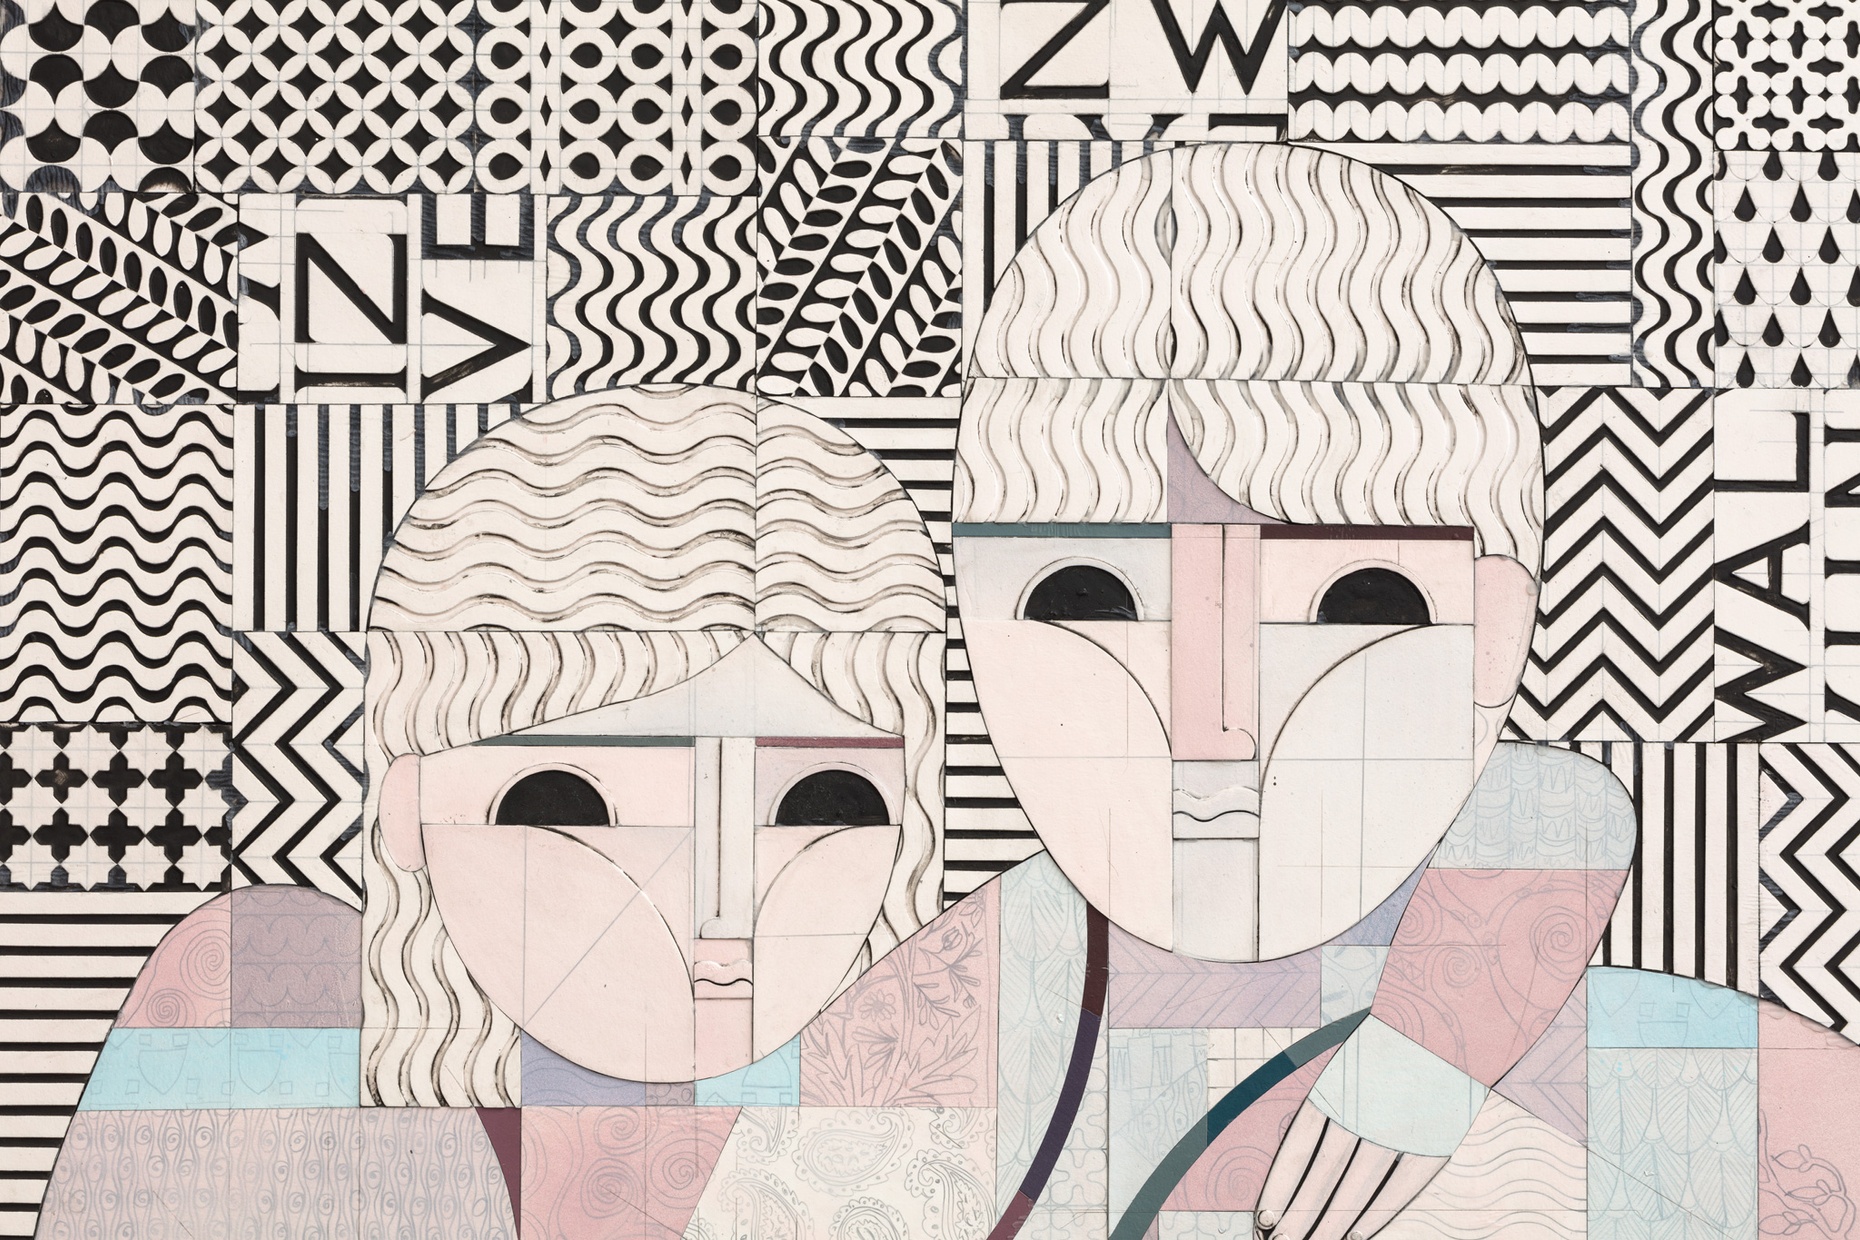 A close-up of an two abstract people formed out of abstract, pastel geometric shapes against a black and white patterned background.